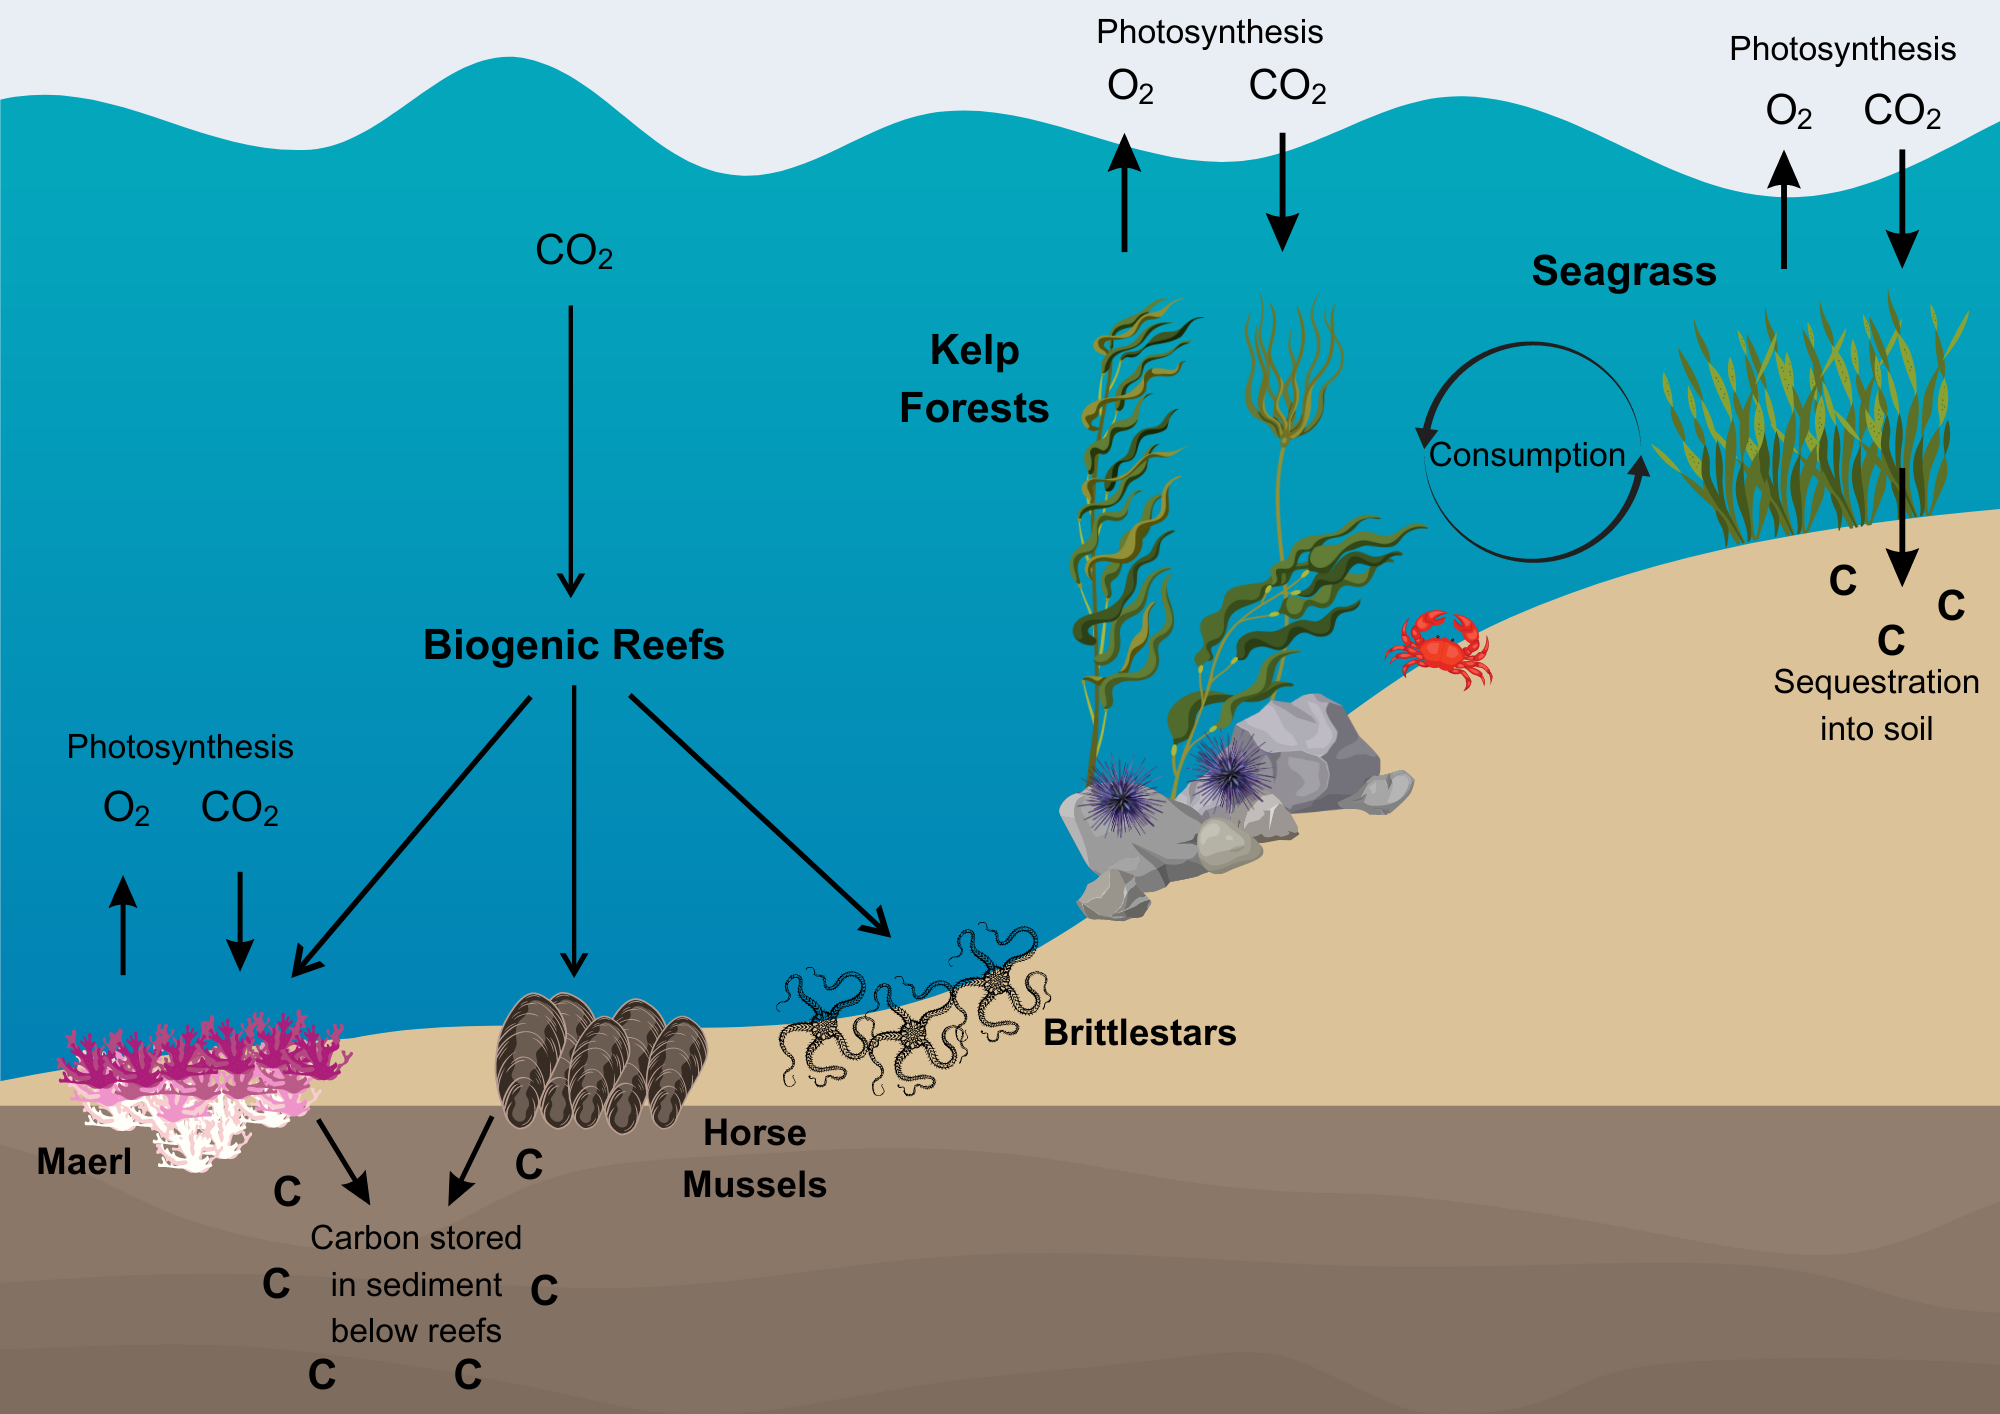 A diagram showing sources of blue carbon within the marine environment